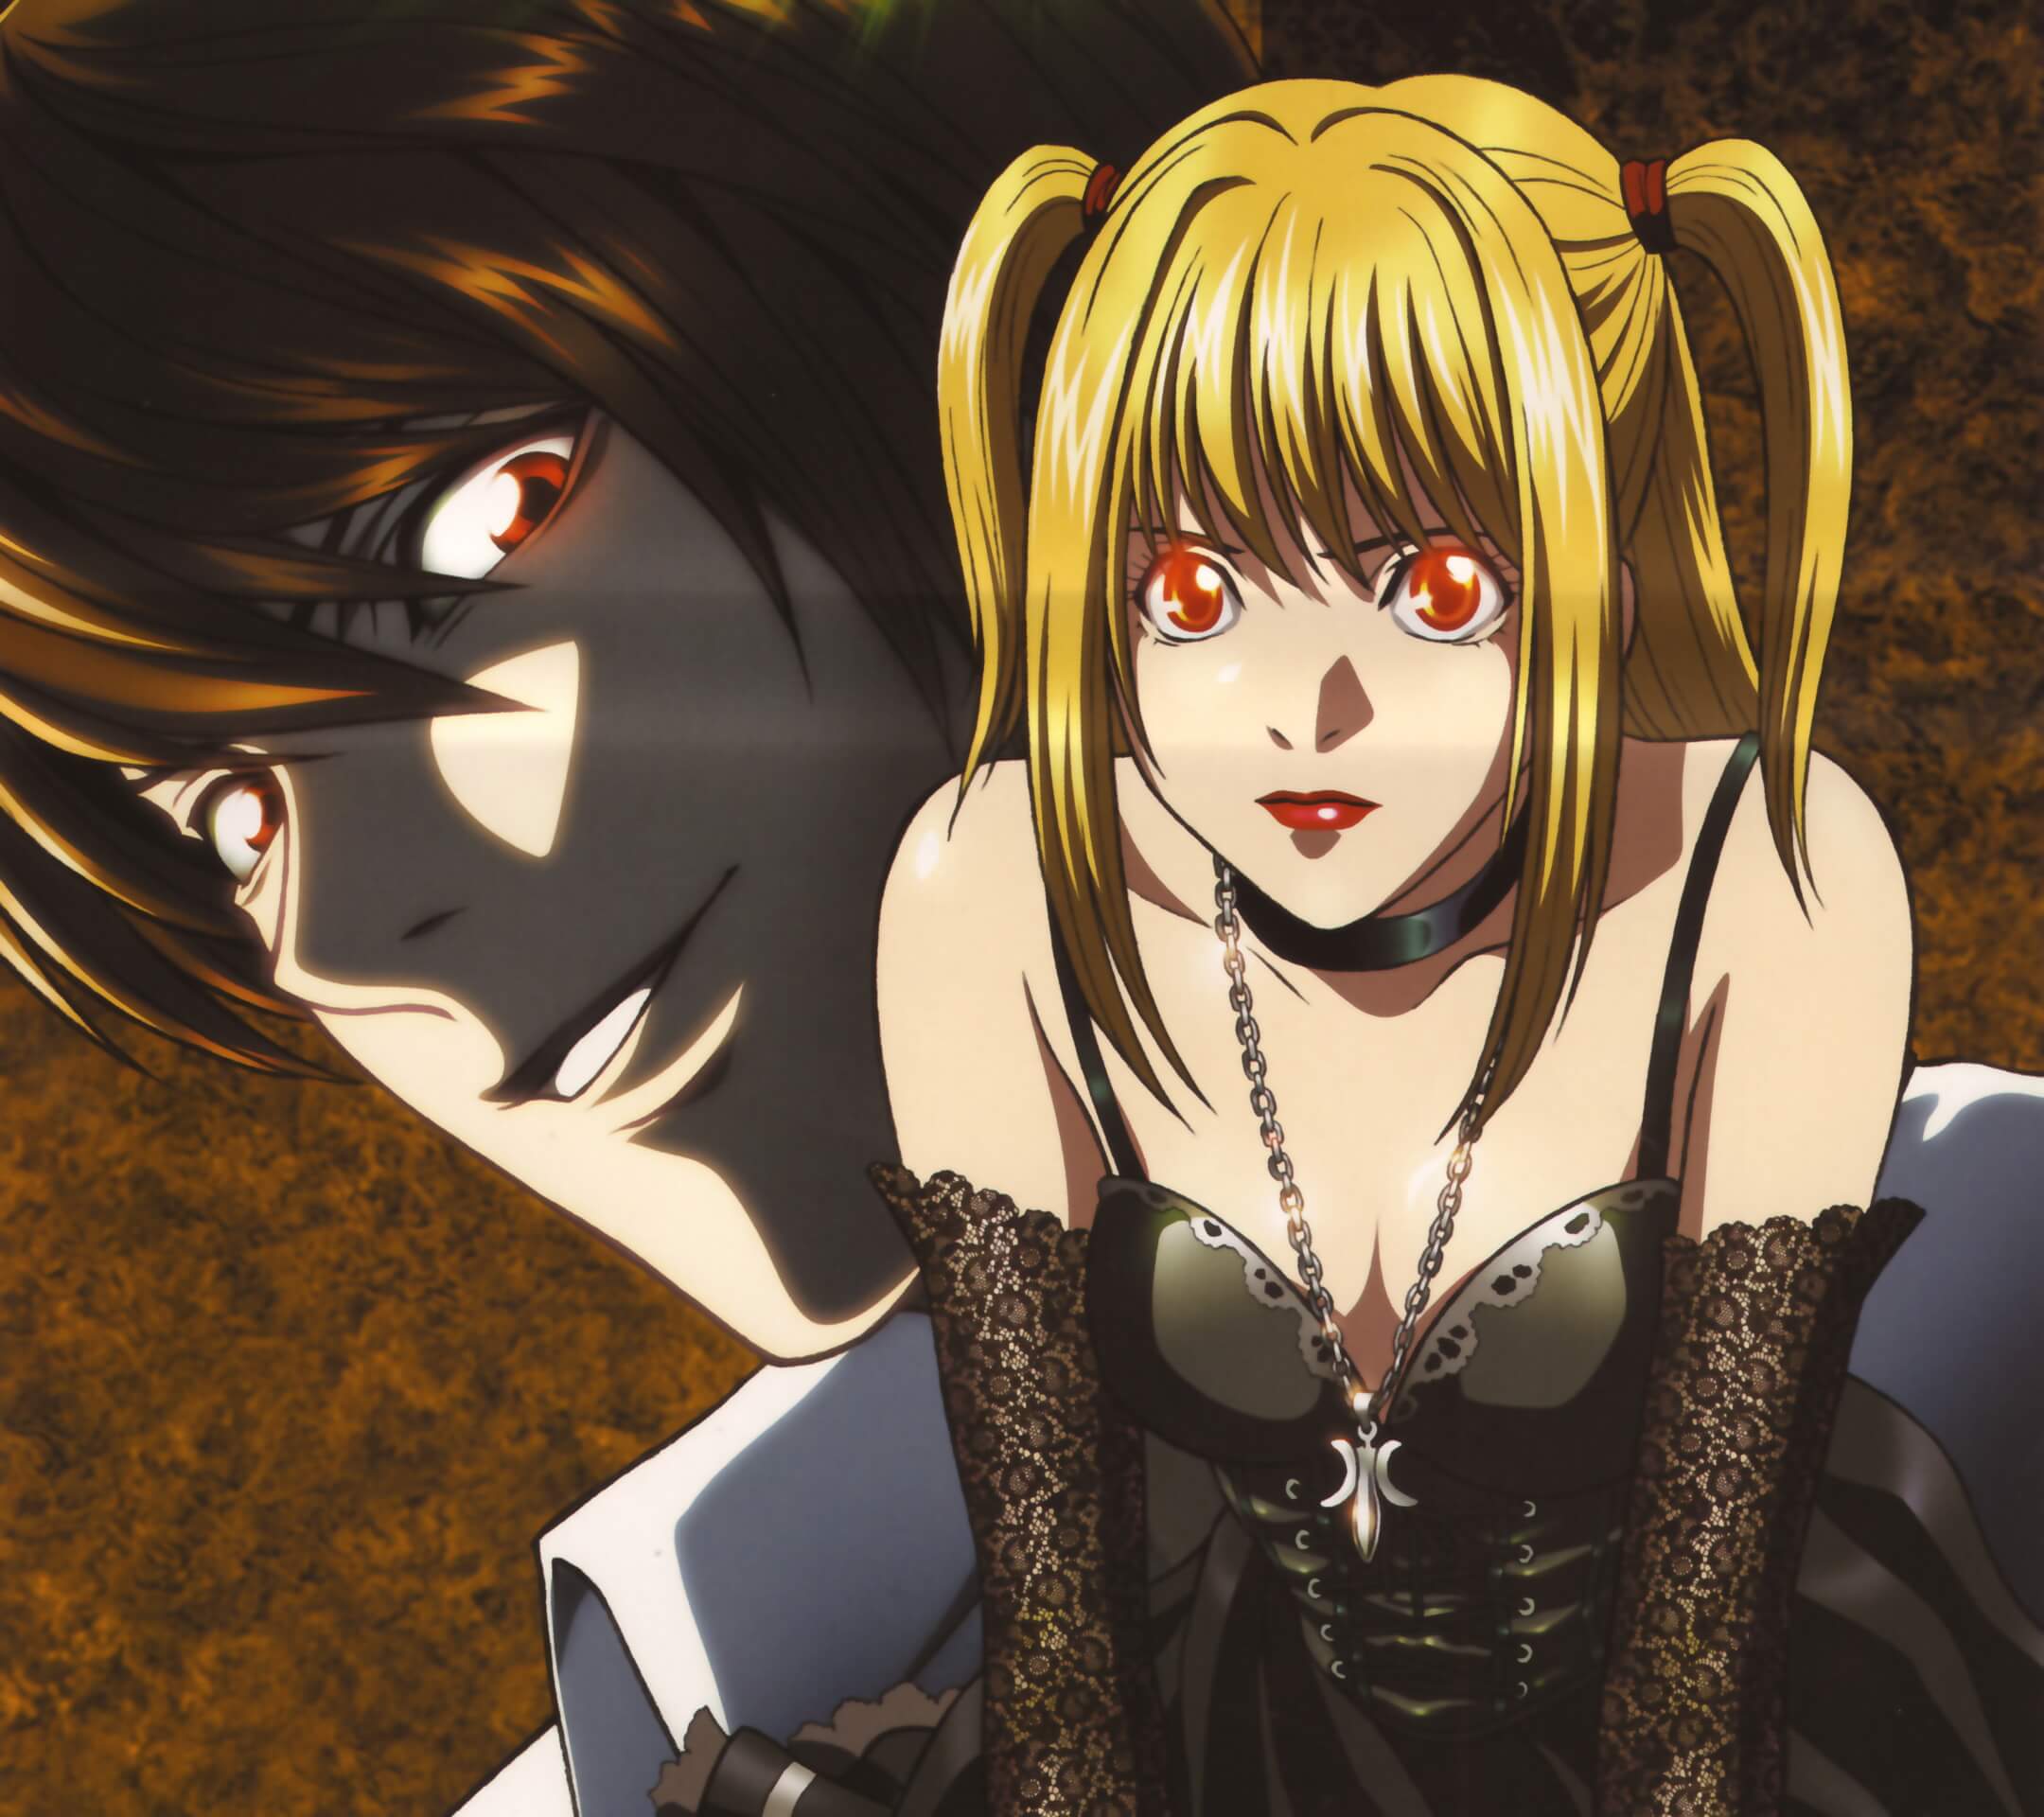 death note light yagami and misa